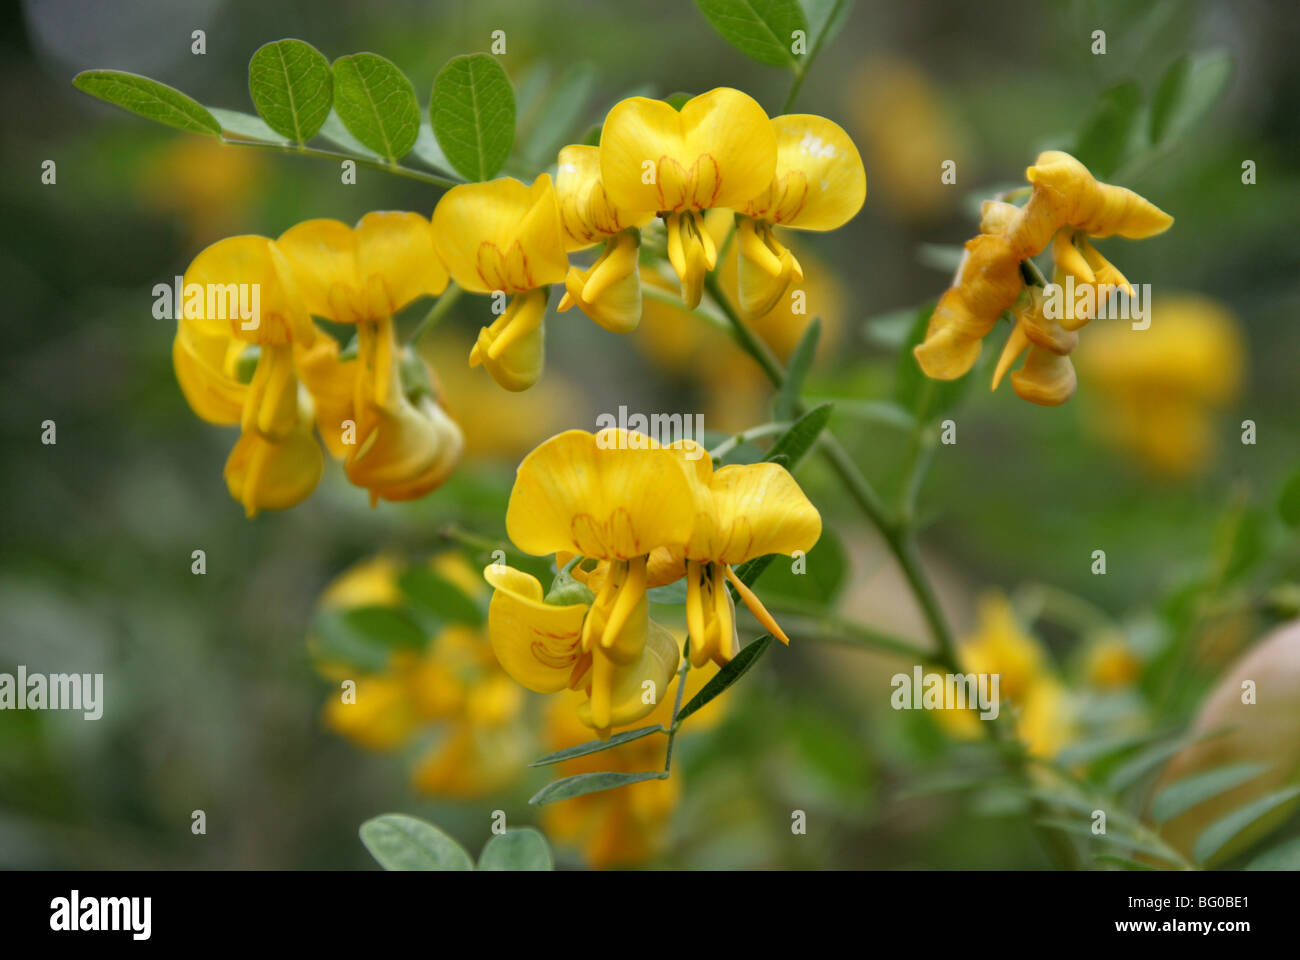 Bladder Senna, Bladder-Senna, Bladdersenna, Colutea cilicica, Fabaceae, South East Europe, Caucasus Stock Photo